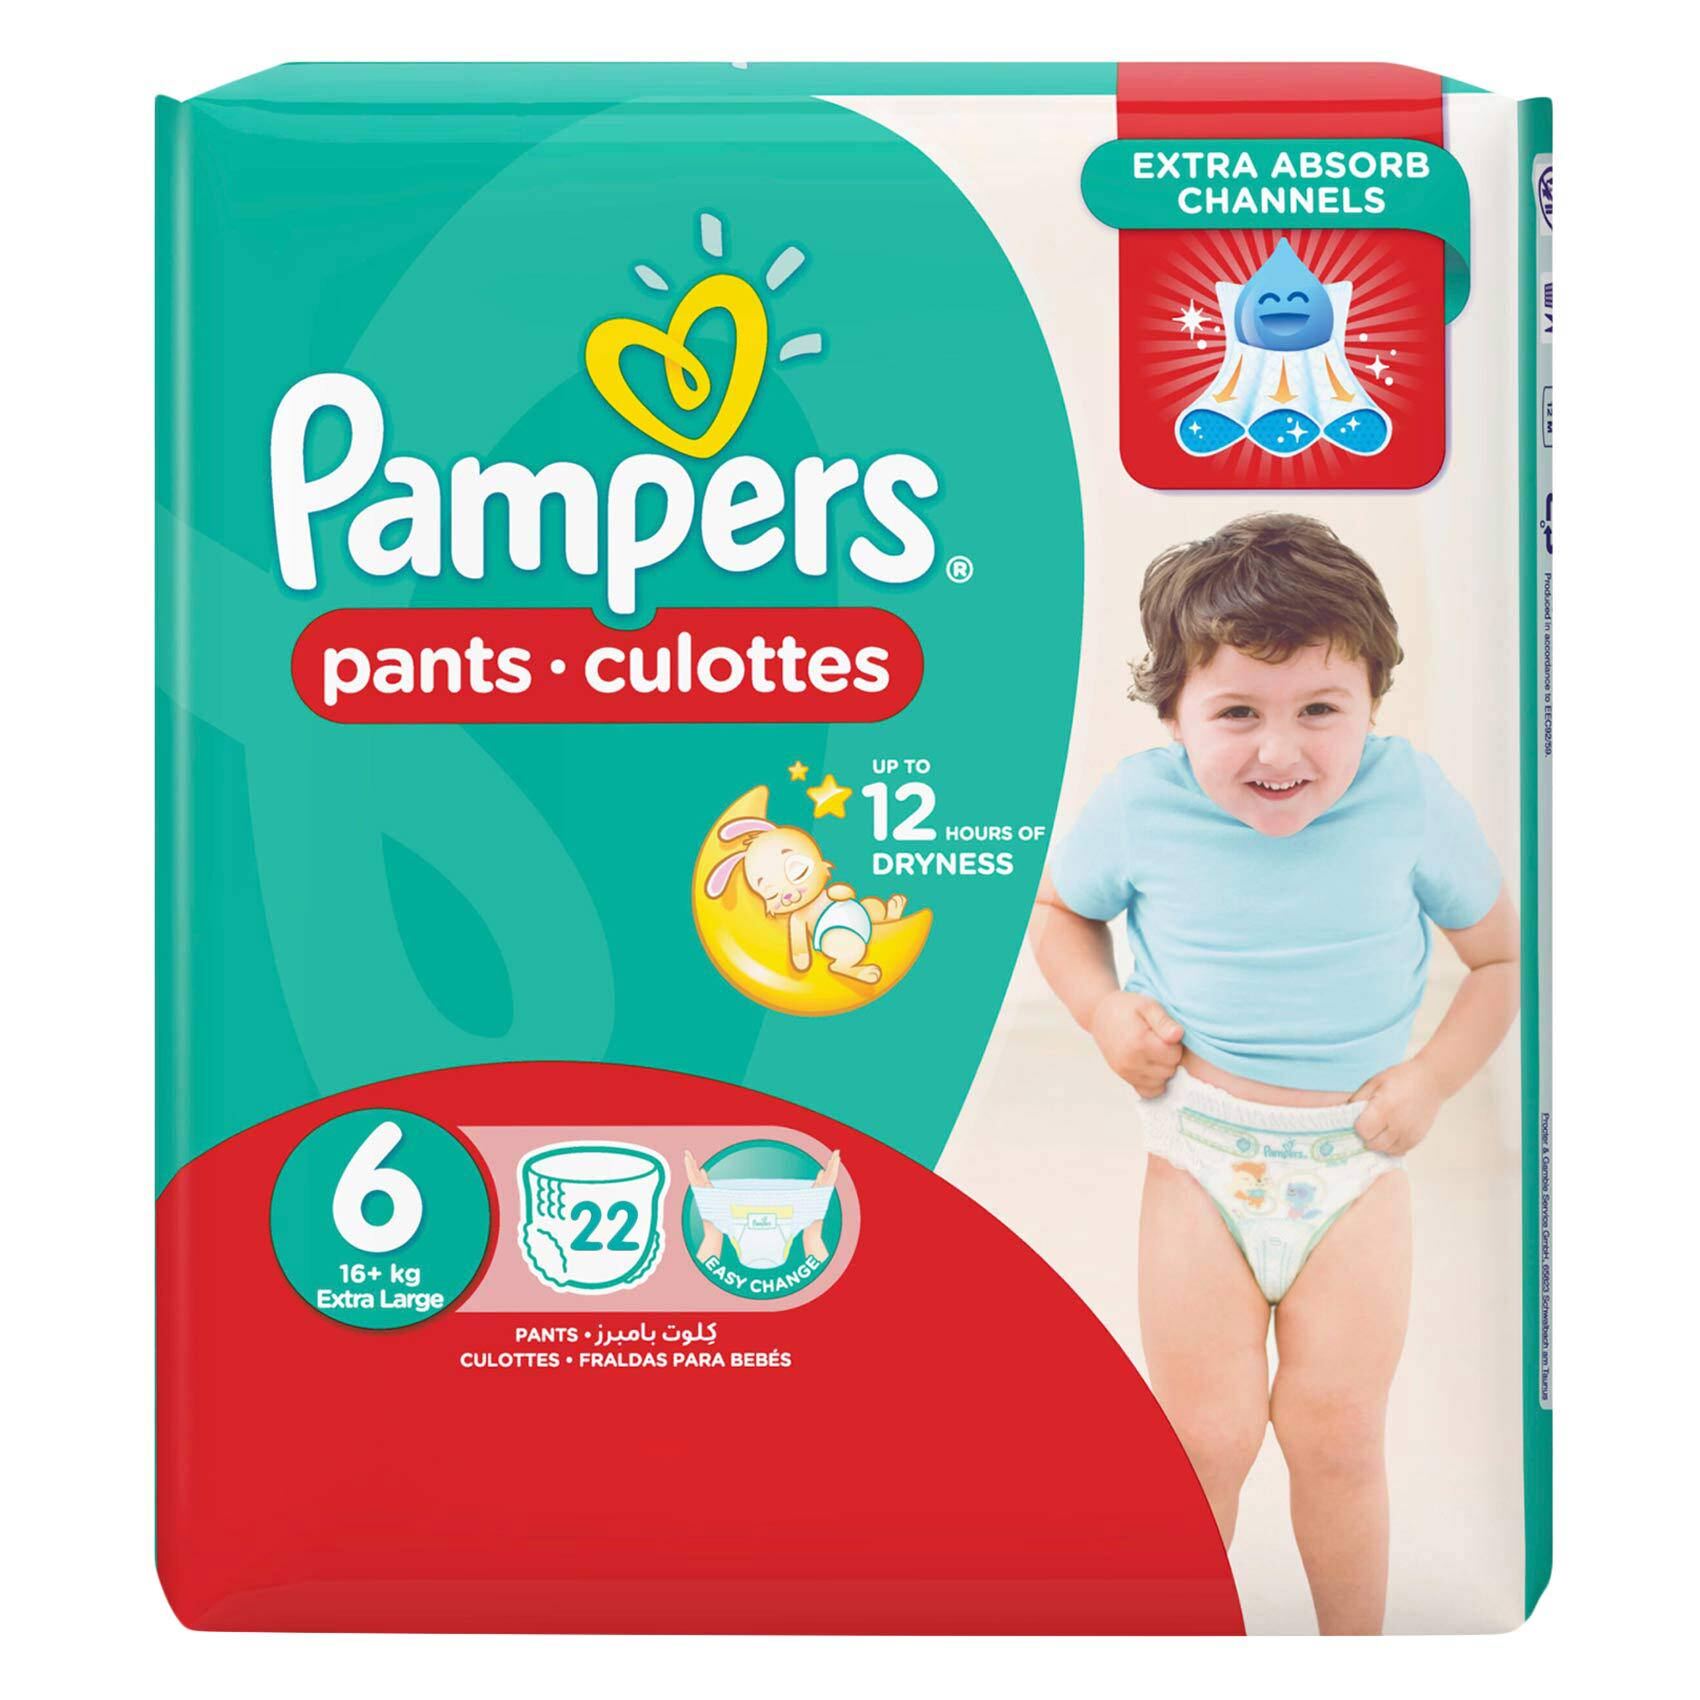 Buy Pampers Pants Size 6 48 Pieces Online - Carrefour Kenya